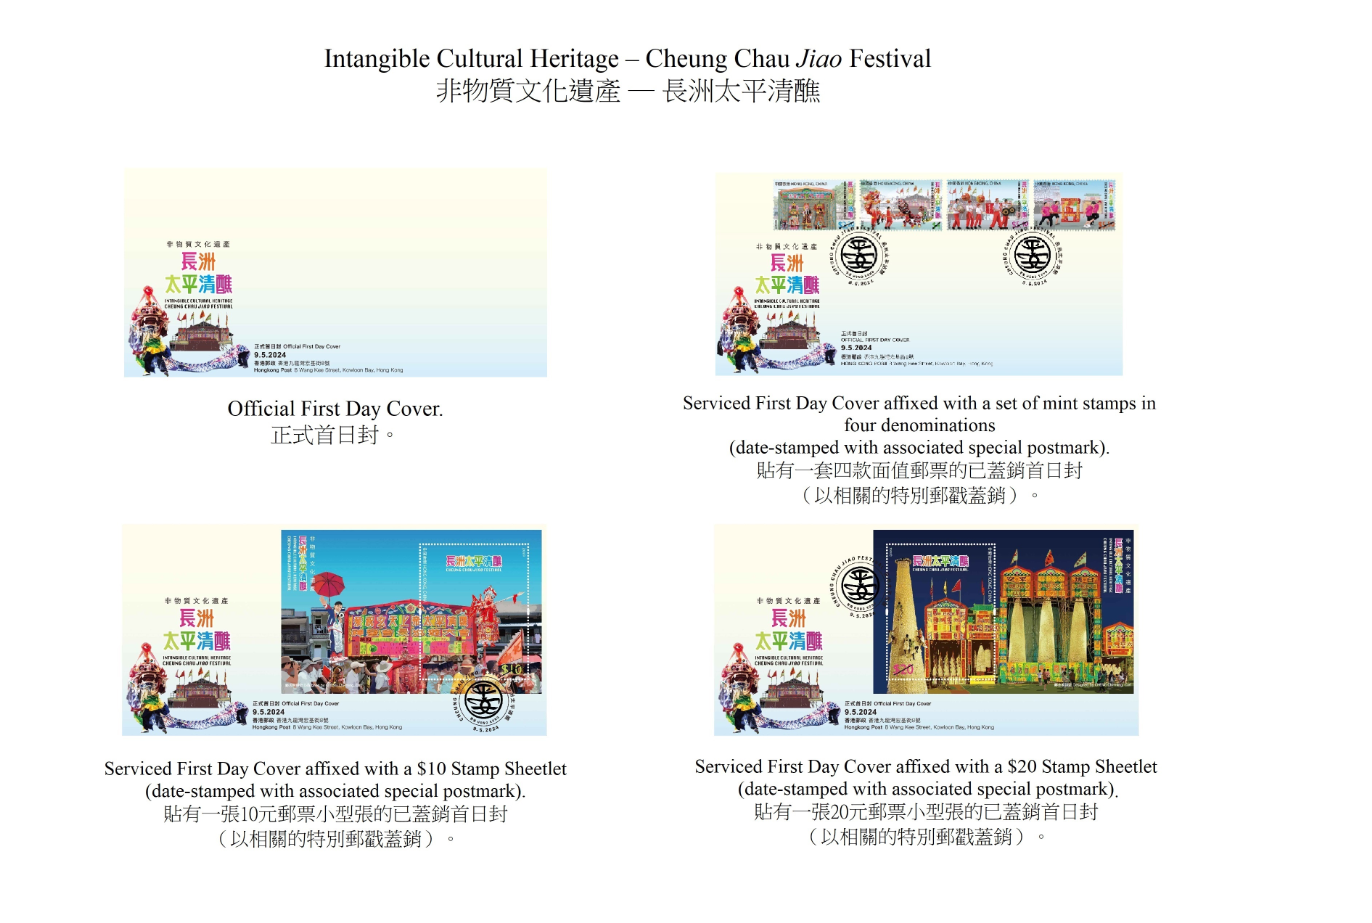 Hongkong Post will launch a special stamp issue and associated philatelic products on the theme of "Intangible Cultural Heritage - Cheung Chau Jiao Festival" on May 9 (Thursday). Photos show the first day covers.
